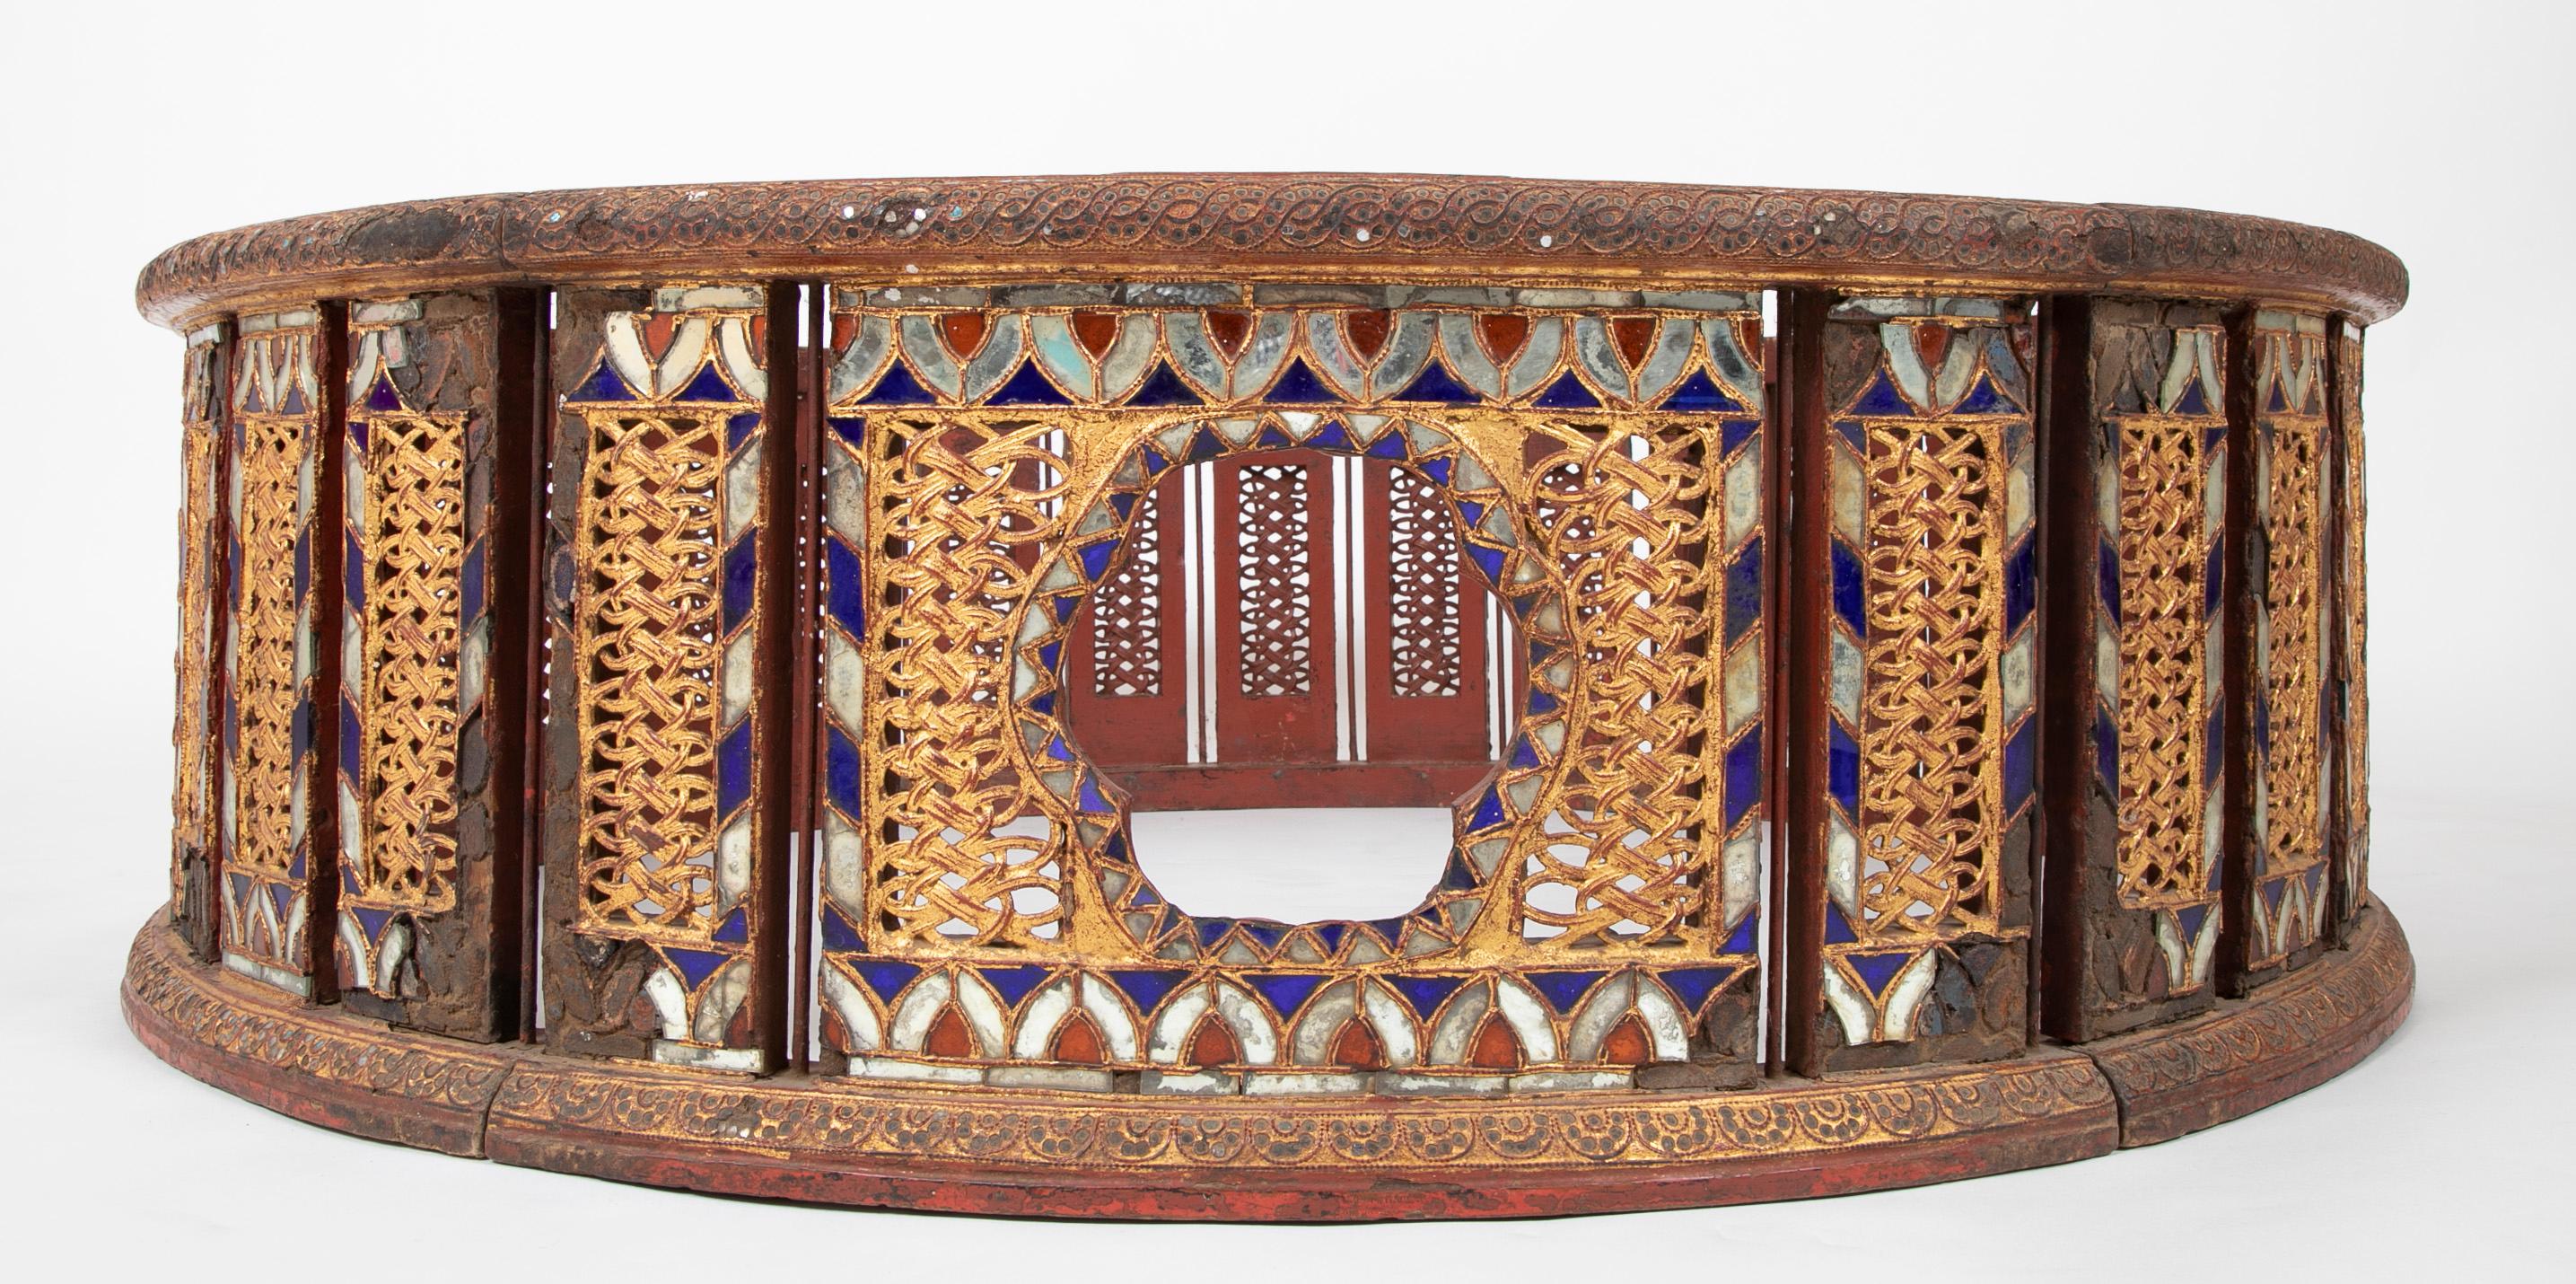 19th Century 19th Burmese Inlaid Mosaic Round Glass Topped Coffee Table, Large Scale